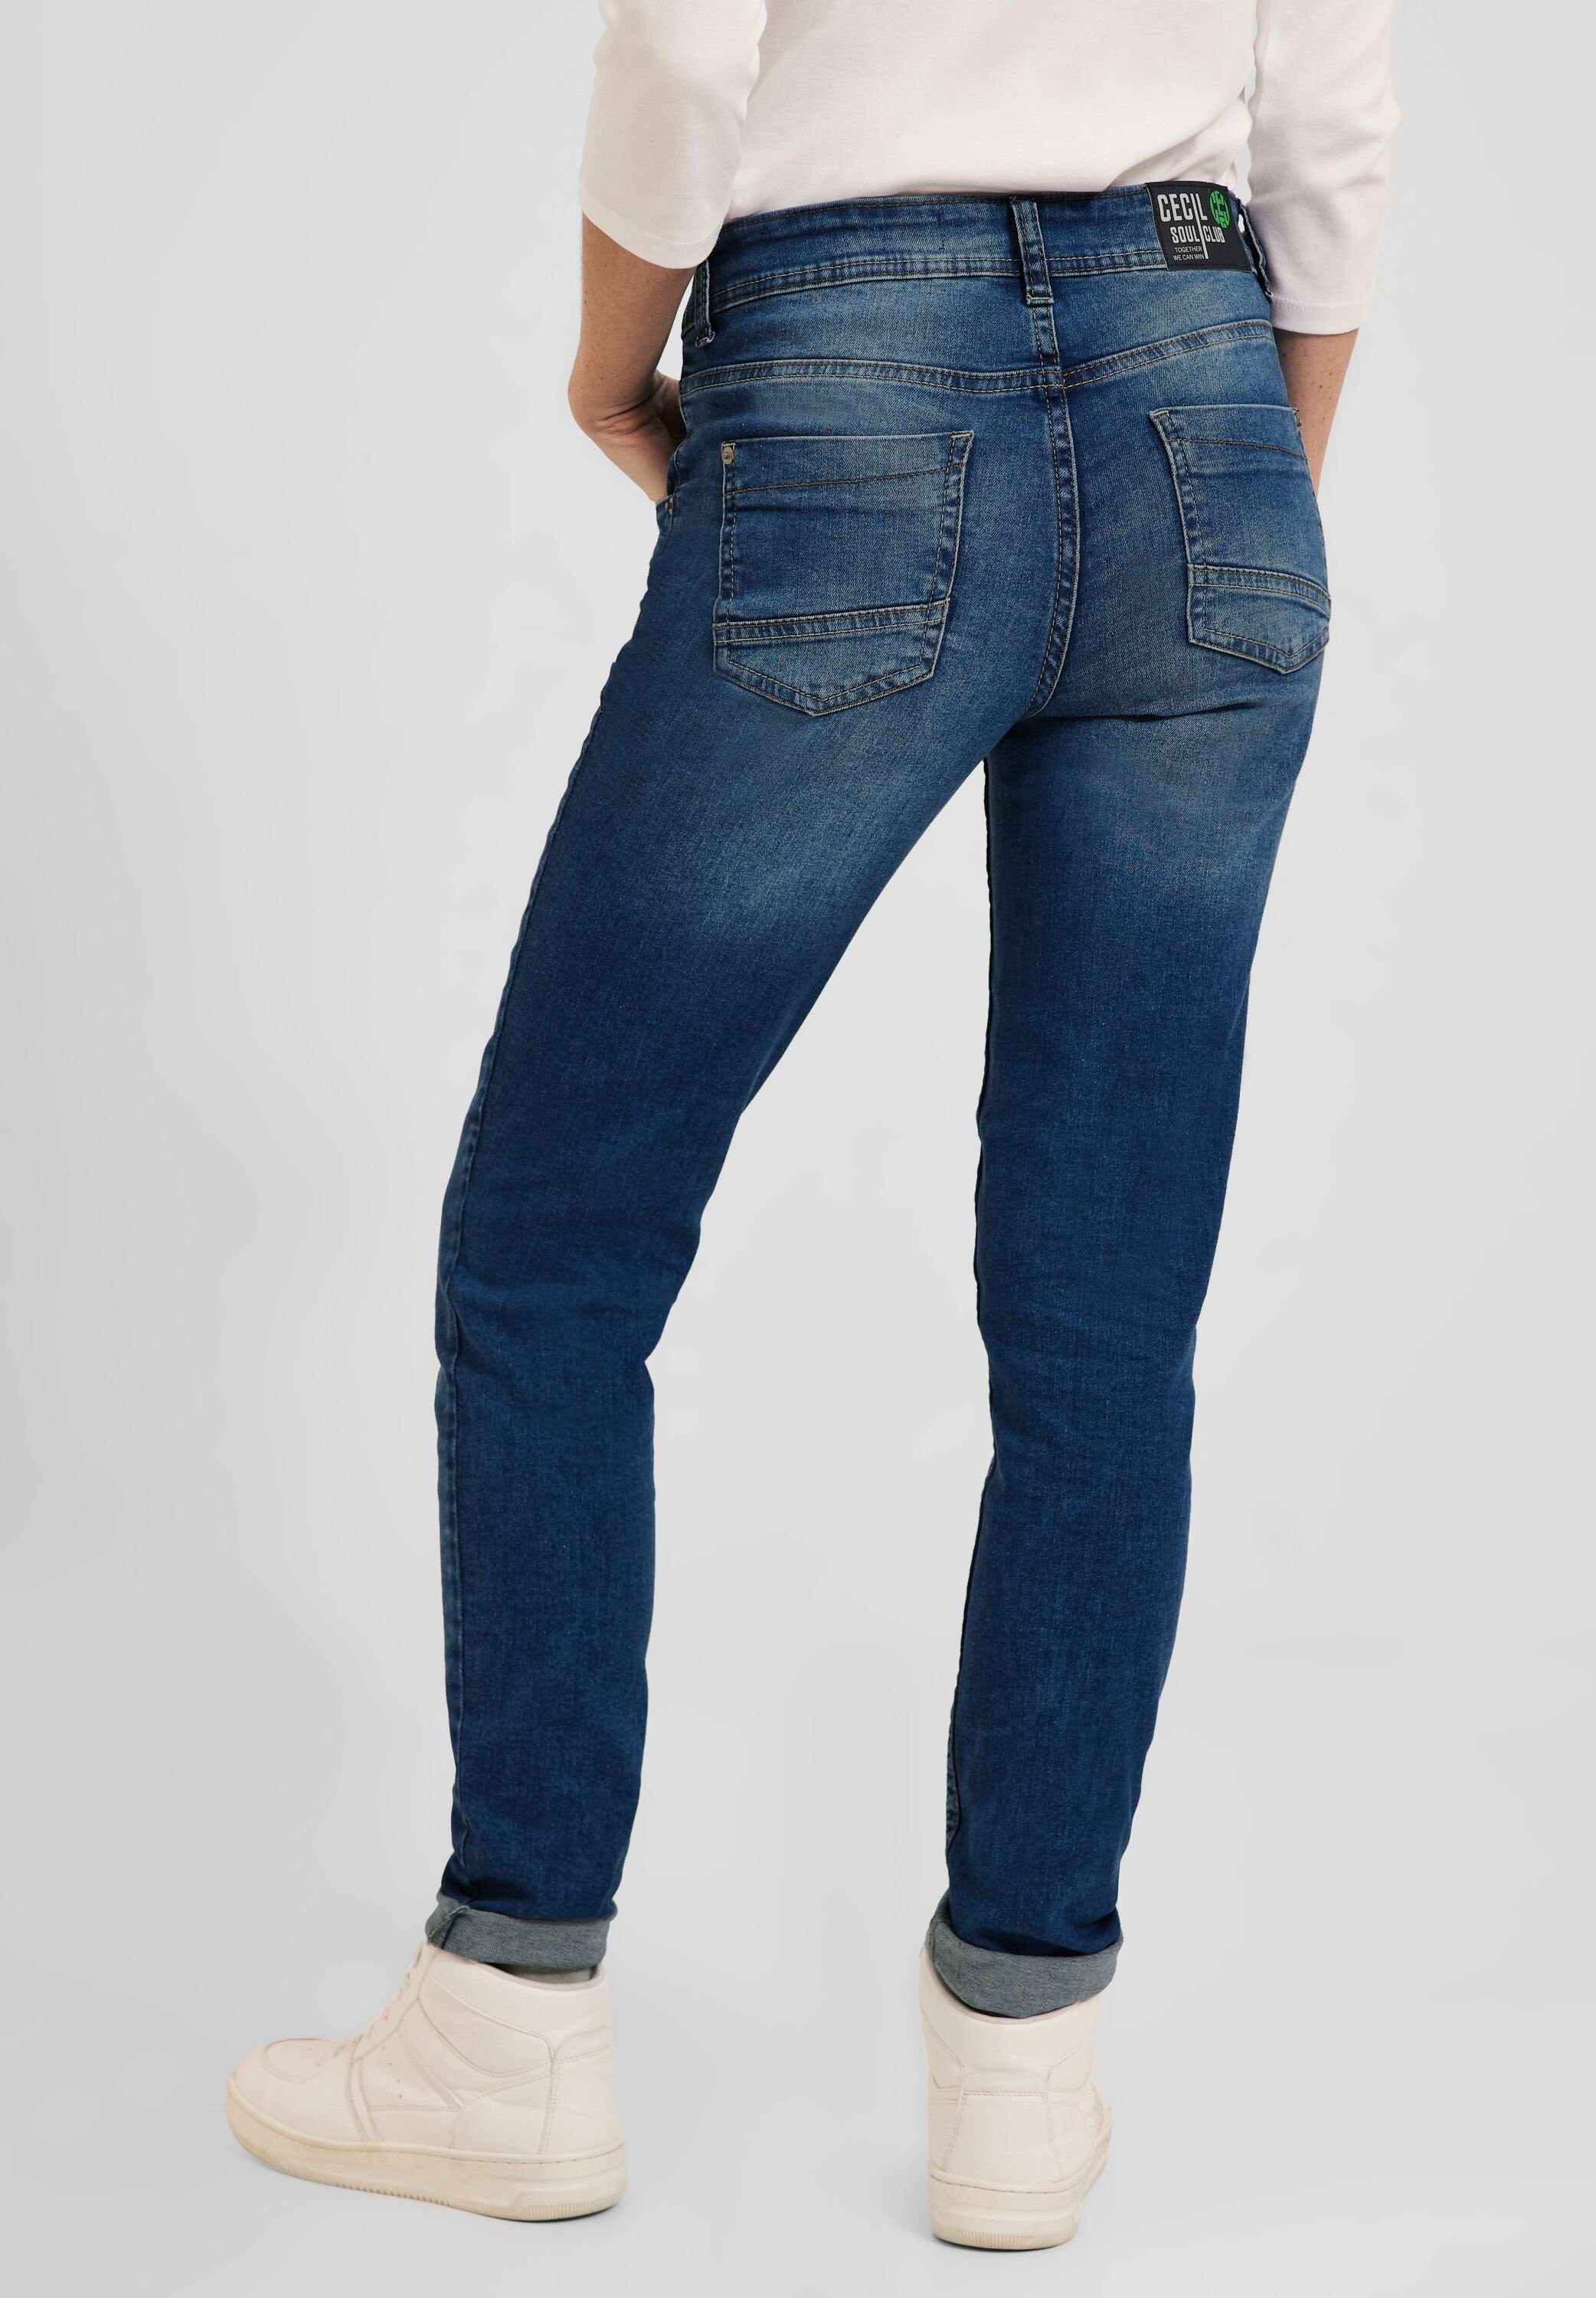 Slim CECIL, Waschung Cecil von Denimhose Five Jeans Pockets, in mittelblauer Cecil Wash Slim-fit-Jeans Mid Basicstyle (1-tlg) Toronto Blue Fit Jeans in